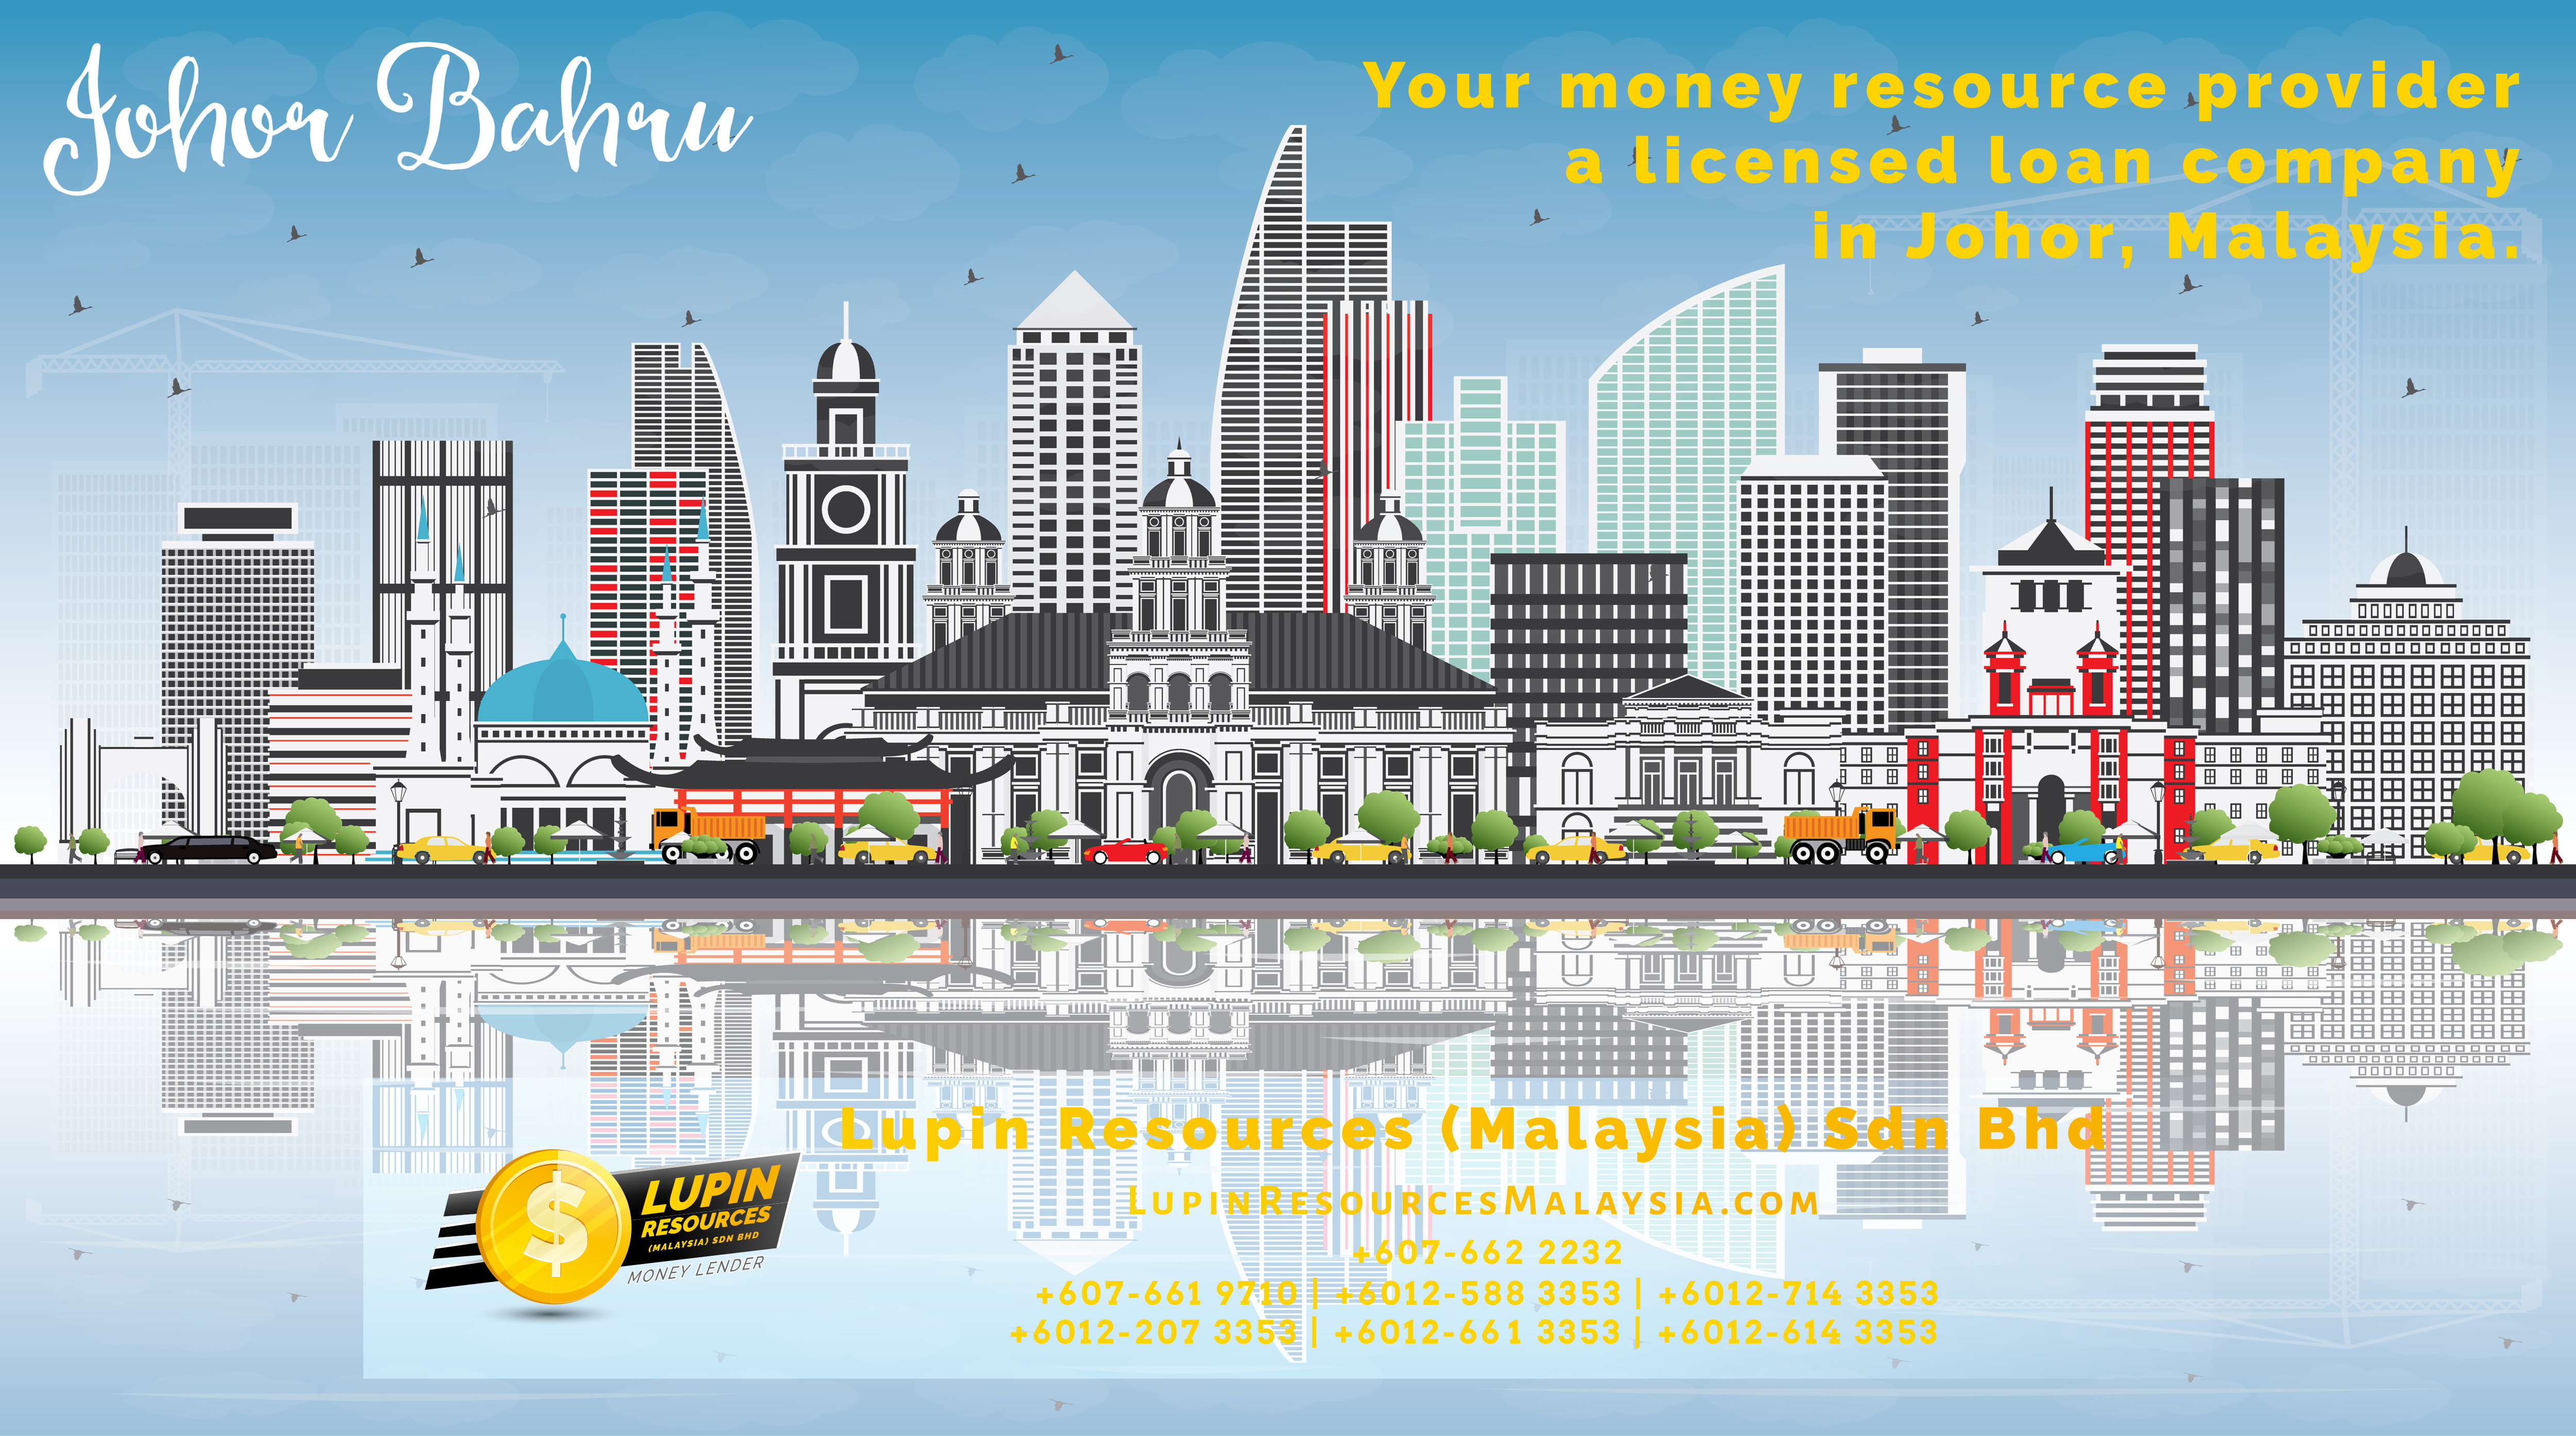 Johor Licensed Loan Company Licensed Money Lender Lupin Resources Malaysia SDN BHD Your money resource provider Kulai Johor Bahru Johor Malaysia Business Loan A01-21